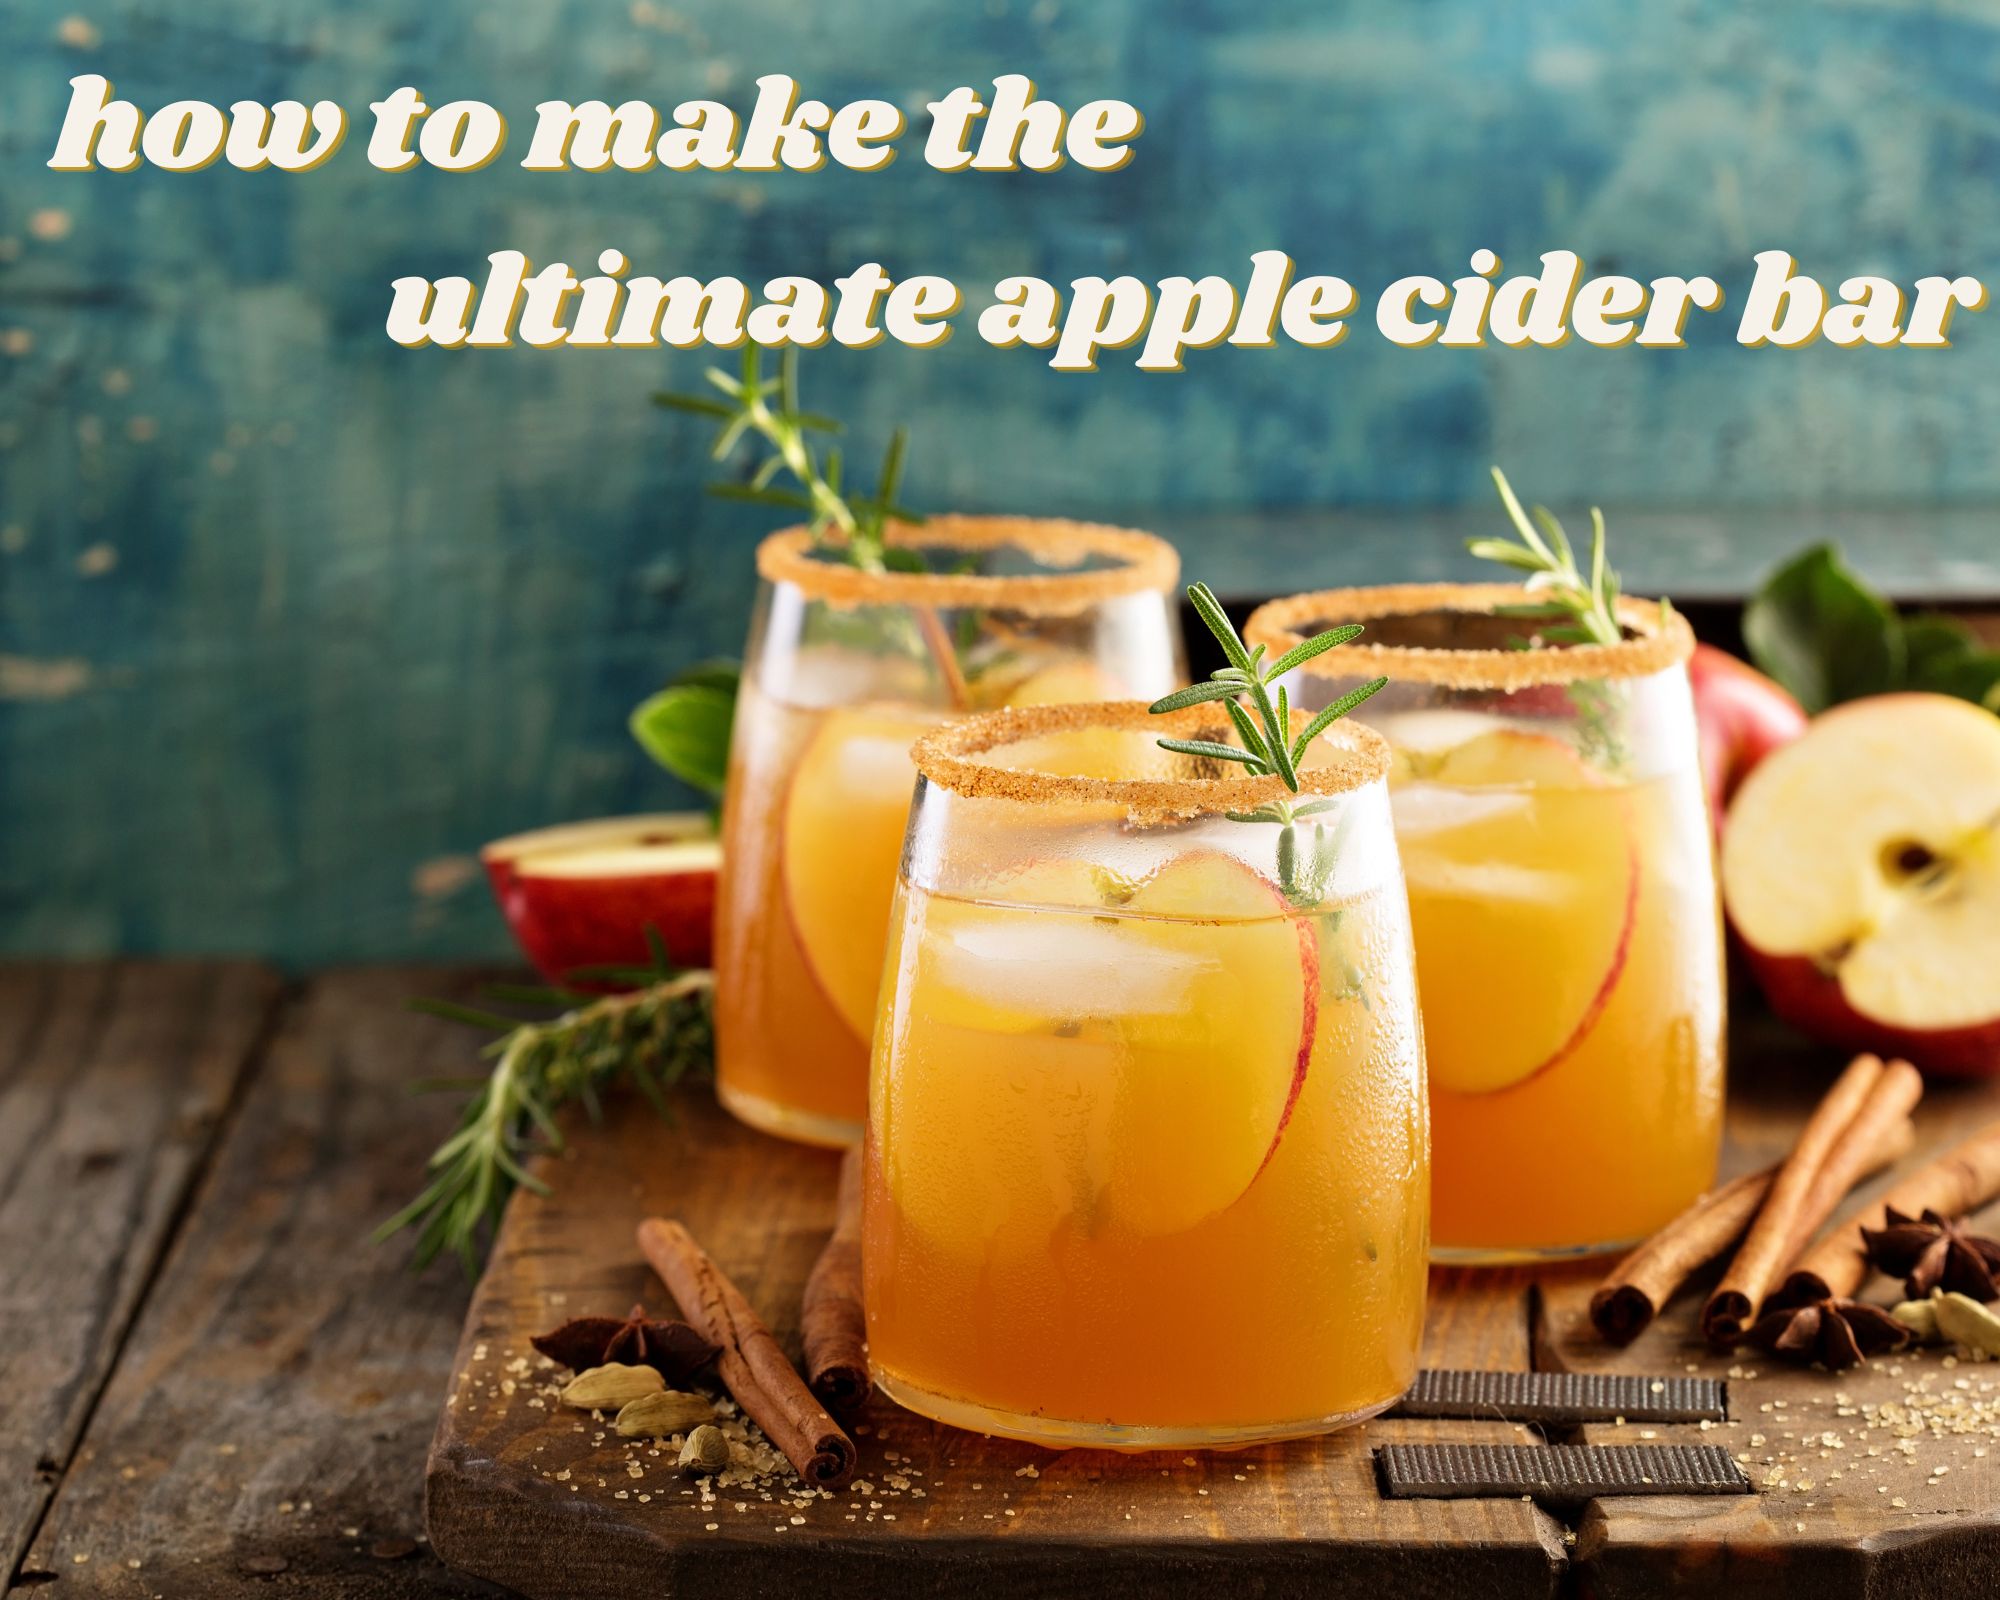 how to make the ultimate apple cider bar